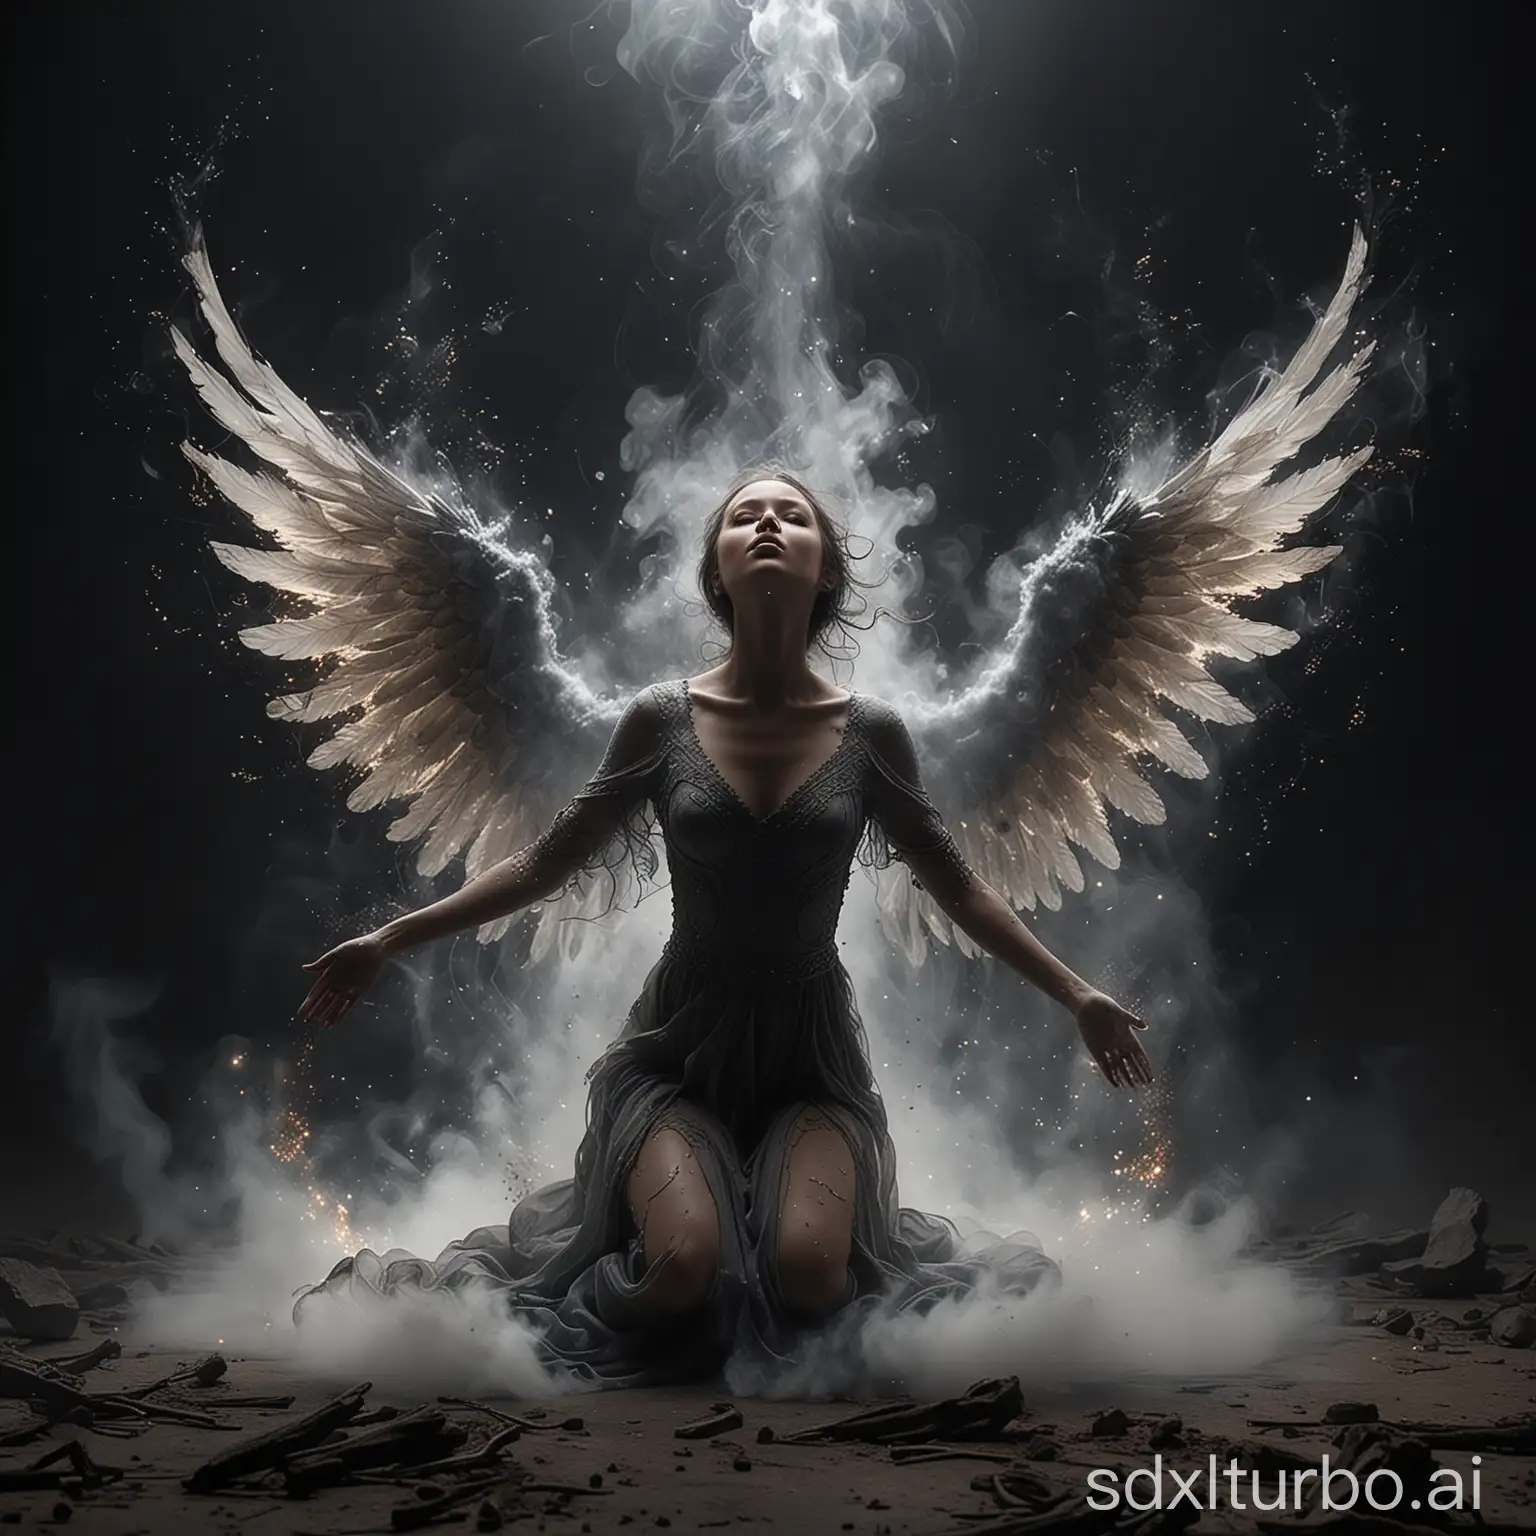 An ultra-detailed, ultra-realistic photo, 16k, 3D of a mystical scene featuring a kneeling figure with angelic wings, shrouded in a dynamic swirl of smoke, ashes, and sparks. The figure, which appears to be a female, is in a pose of reverence or summoning, with her right hand outstretched and glowing with an ethereal light. Her body seems to be made of a combination of organic and otherworldly materials, seamlessly blending into the smoky environment around her. The background is dark and filled with floating particles, enhancing the dramatic and otherworldly atmosphere.